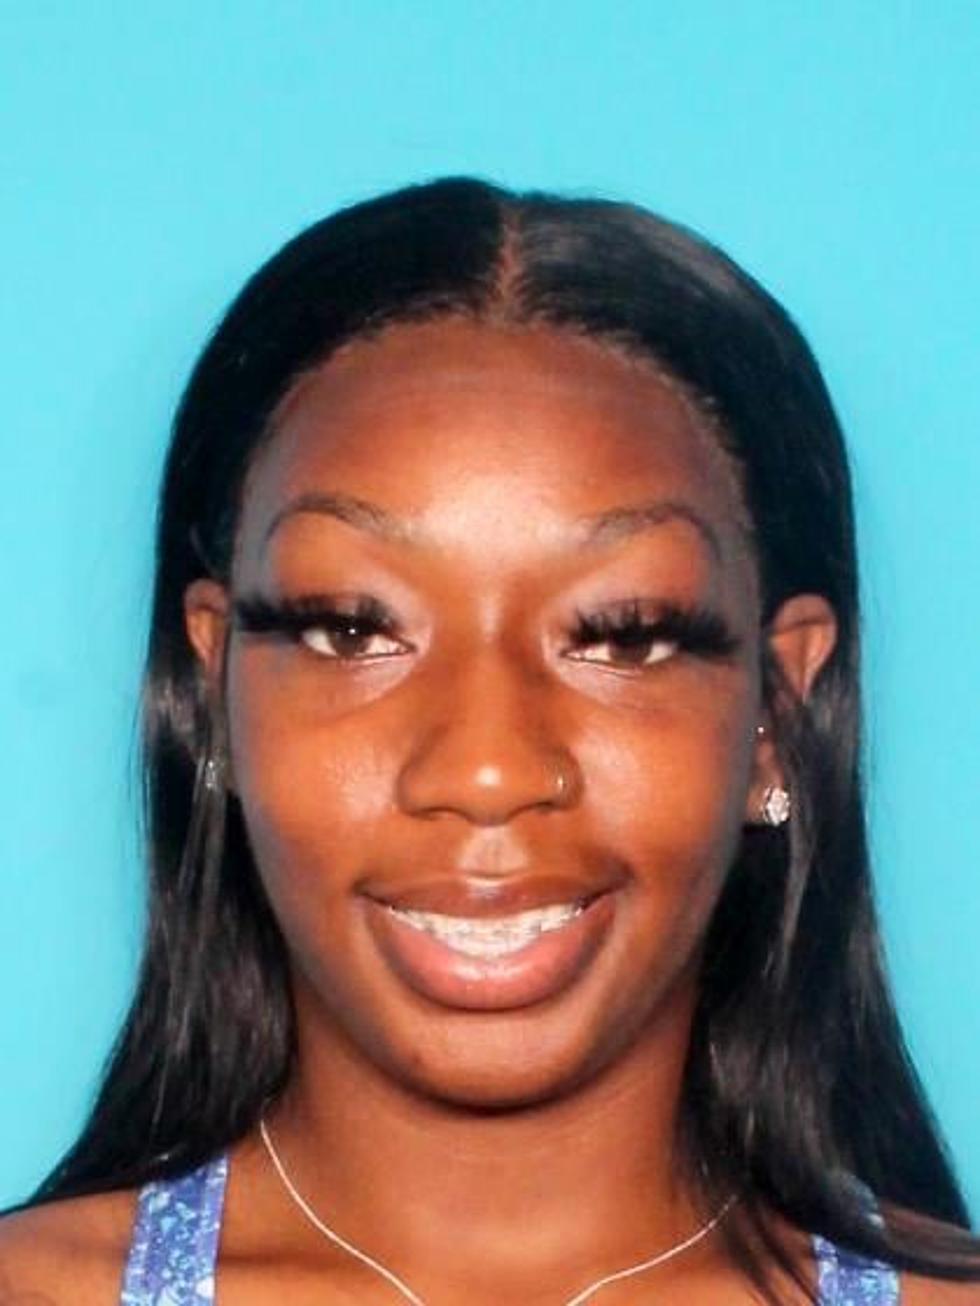 Louisiana Woman Wanted for Illegal Orthodontic Practice